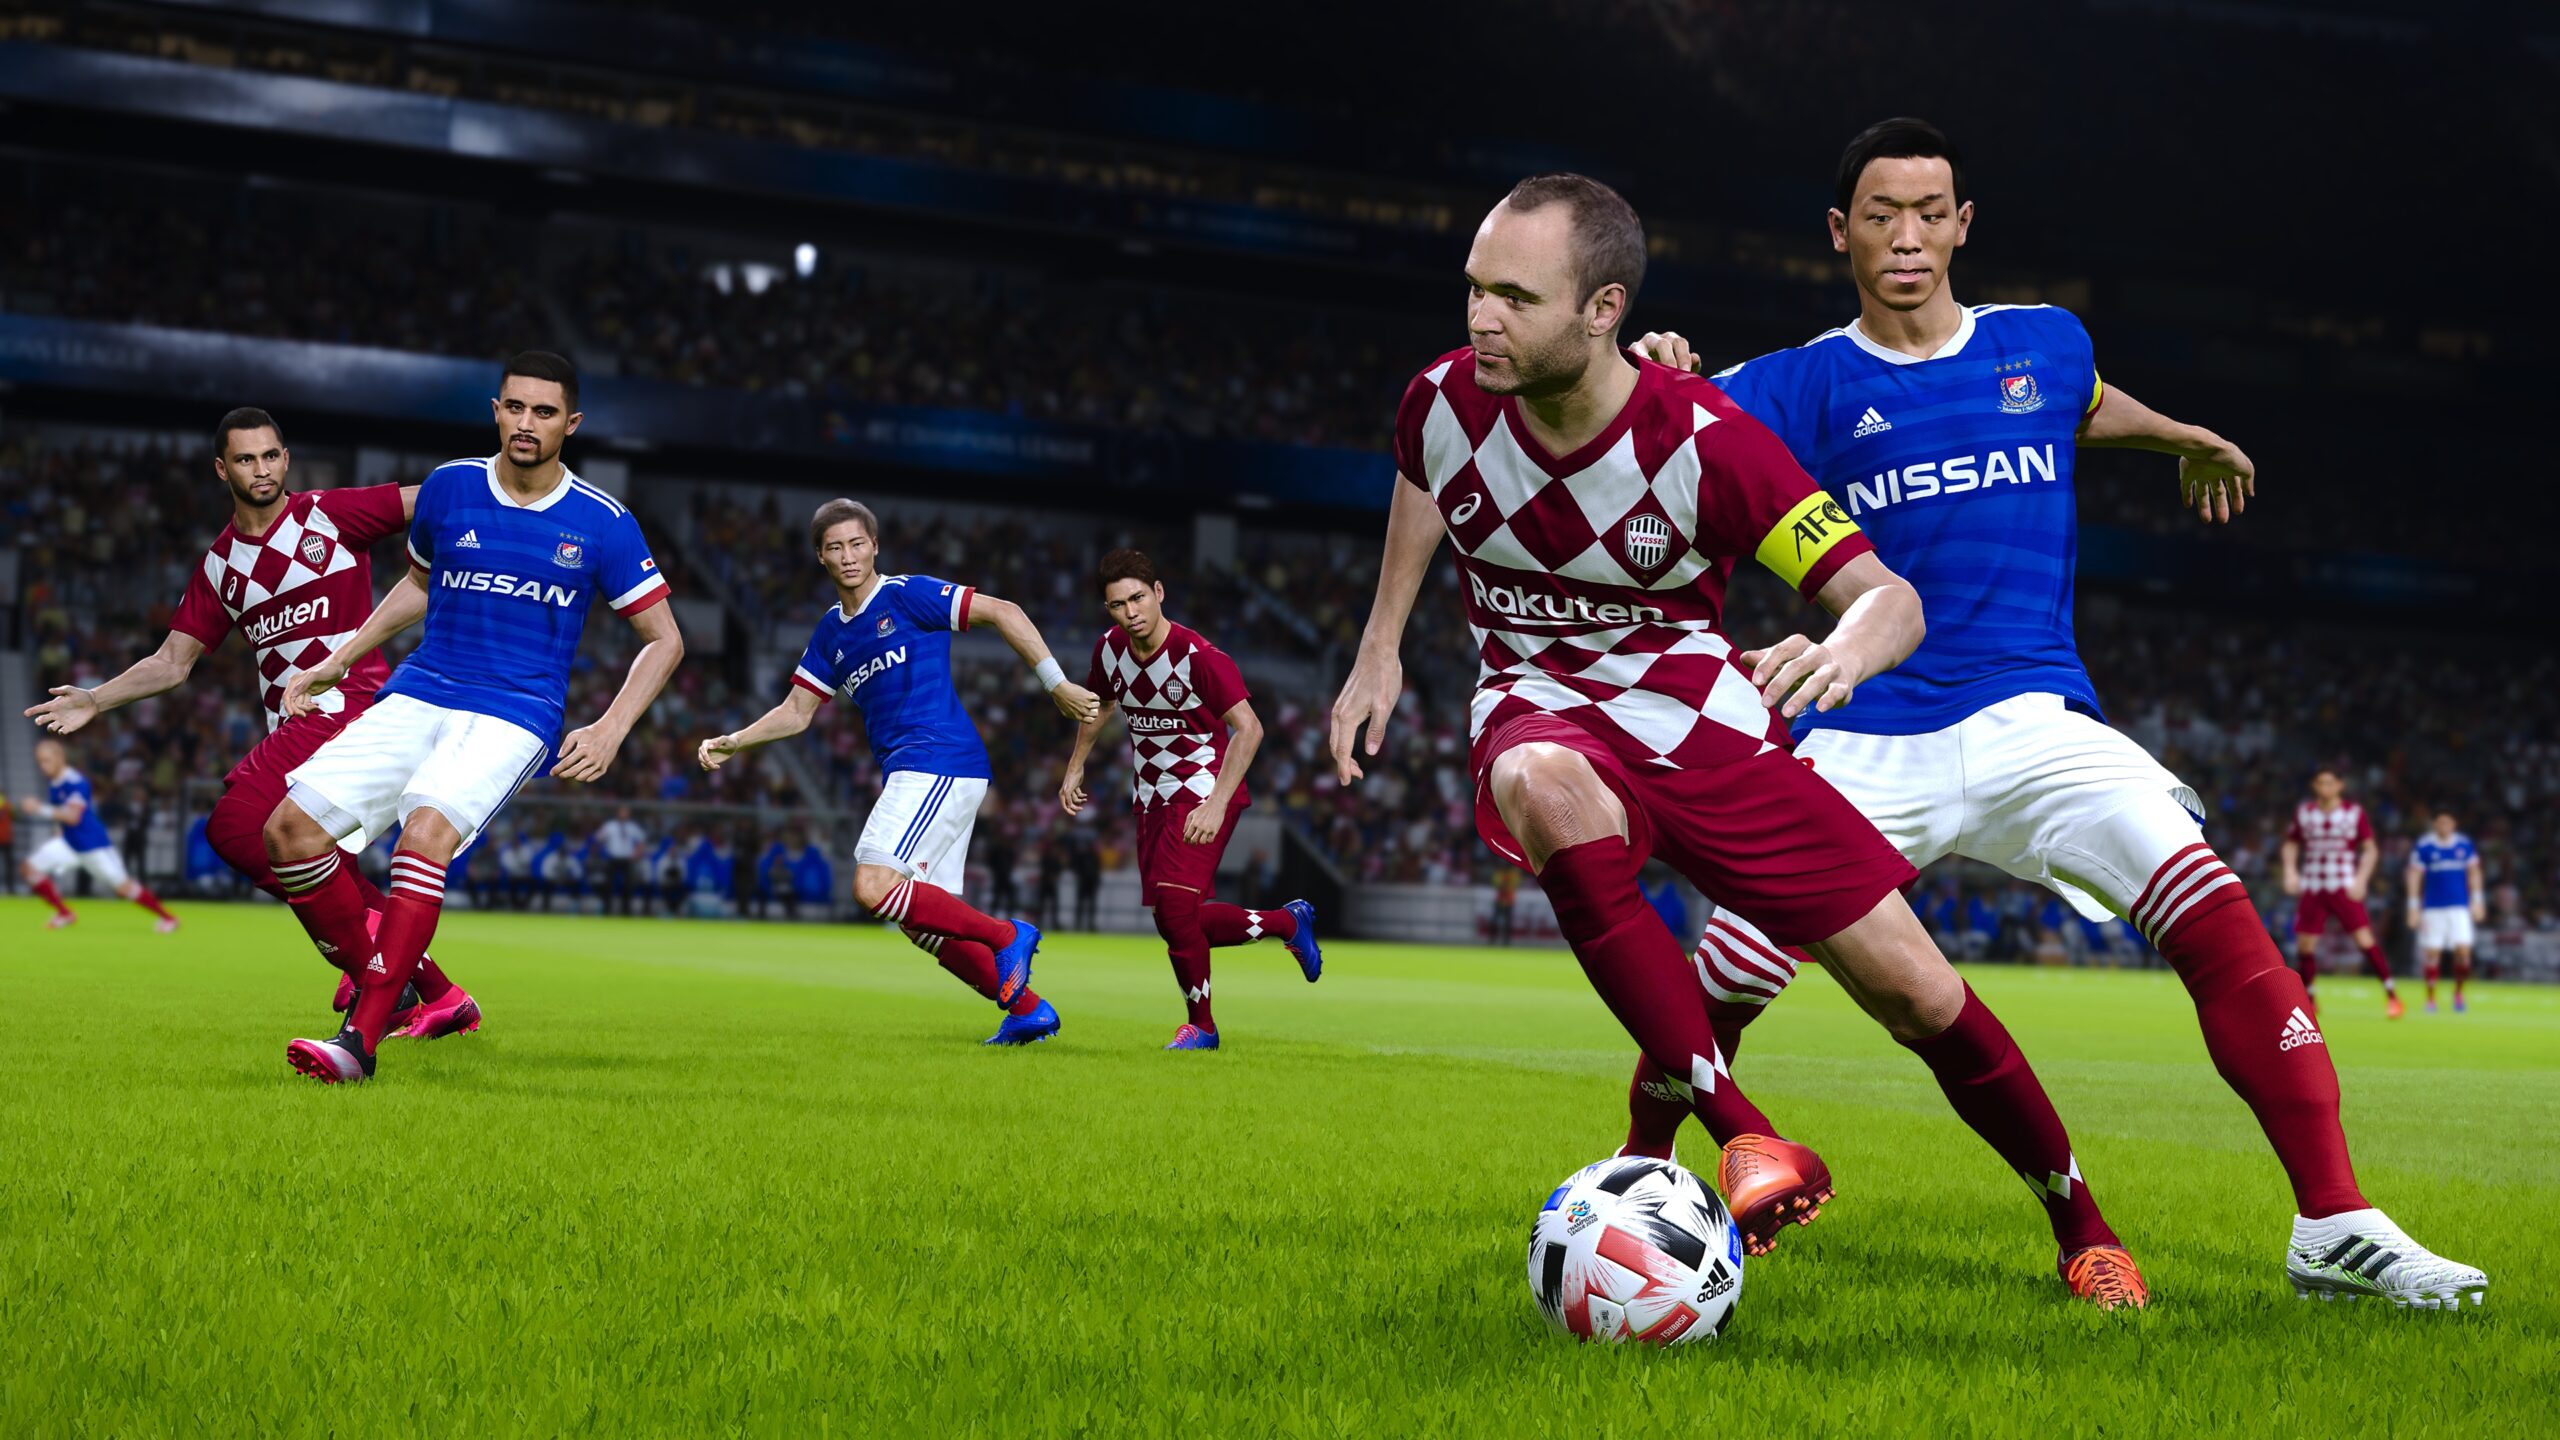 Pro Evolution Soccer 2021 - How to Get Free Coins